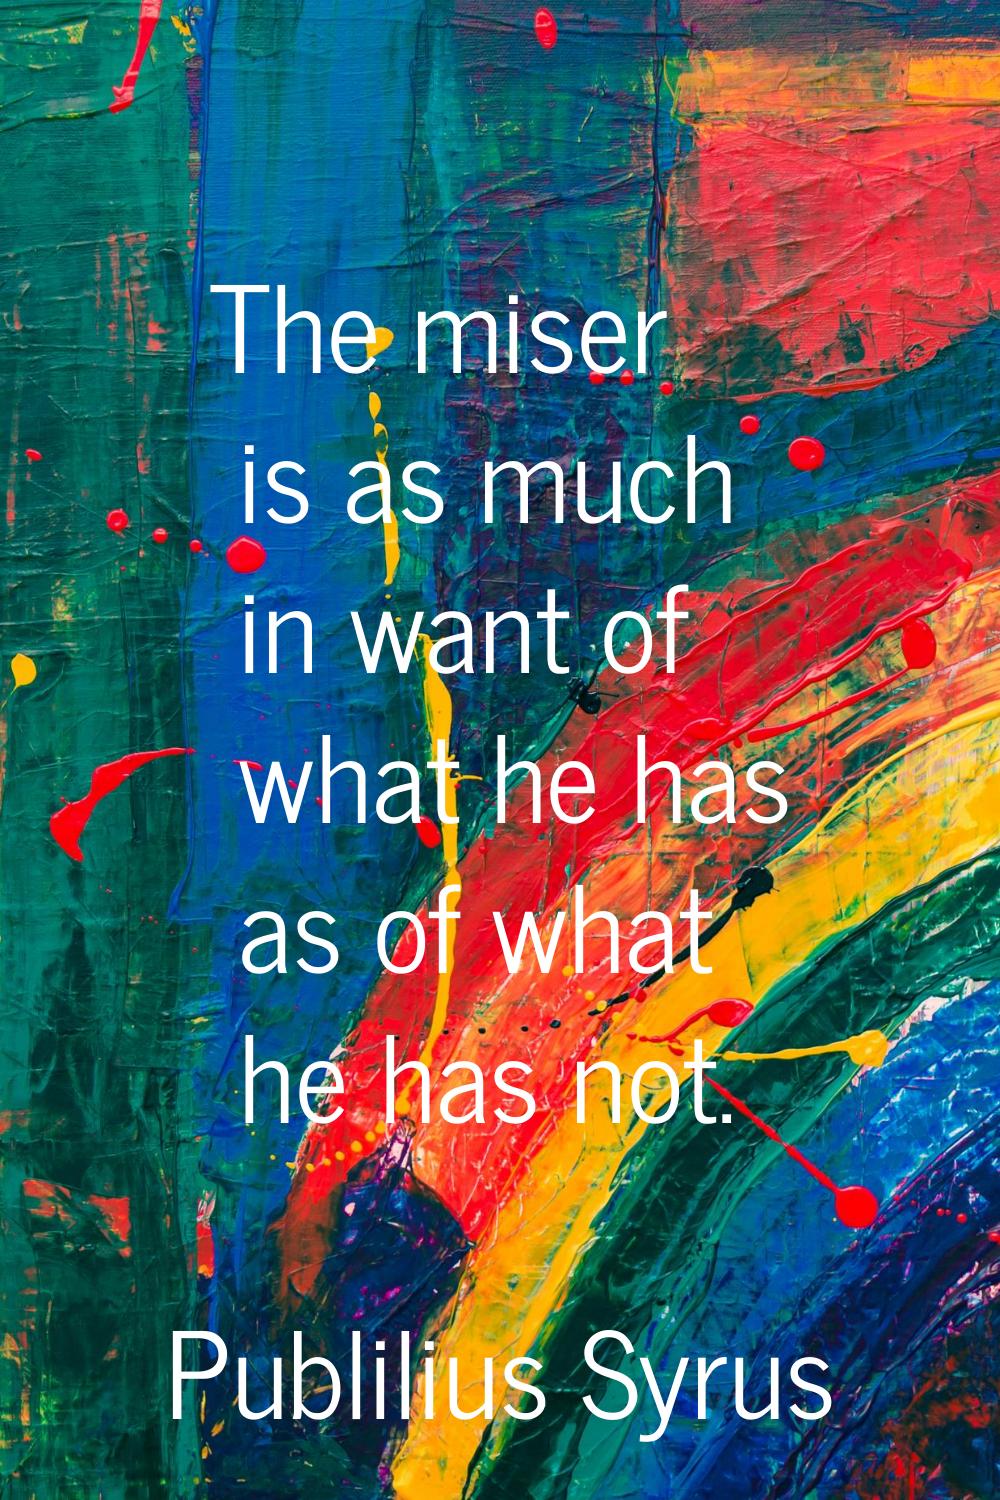 The miser is as much in want of what he has as of what he has not.